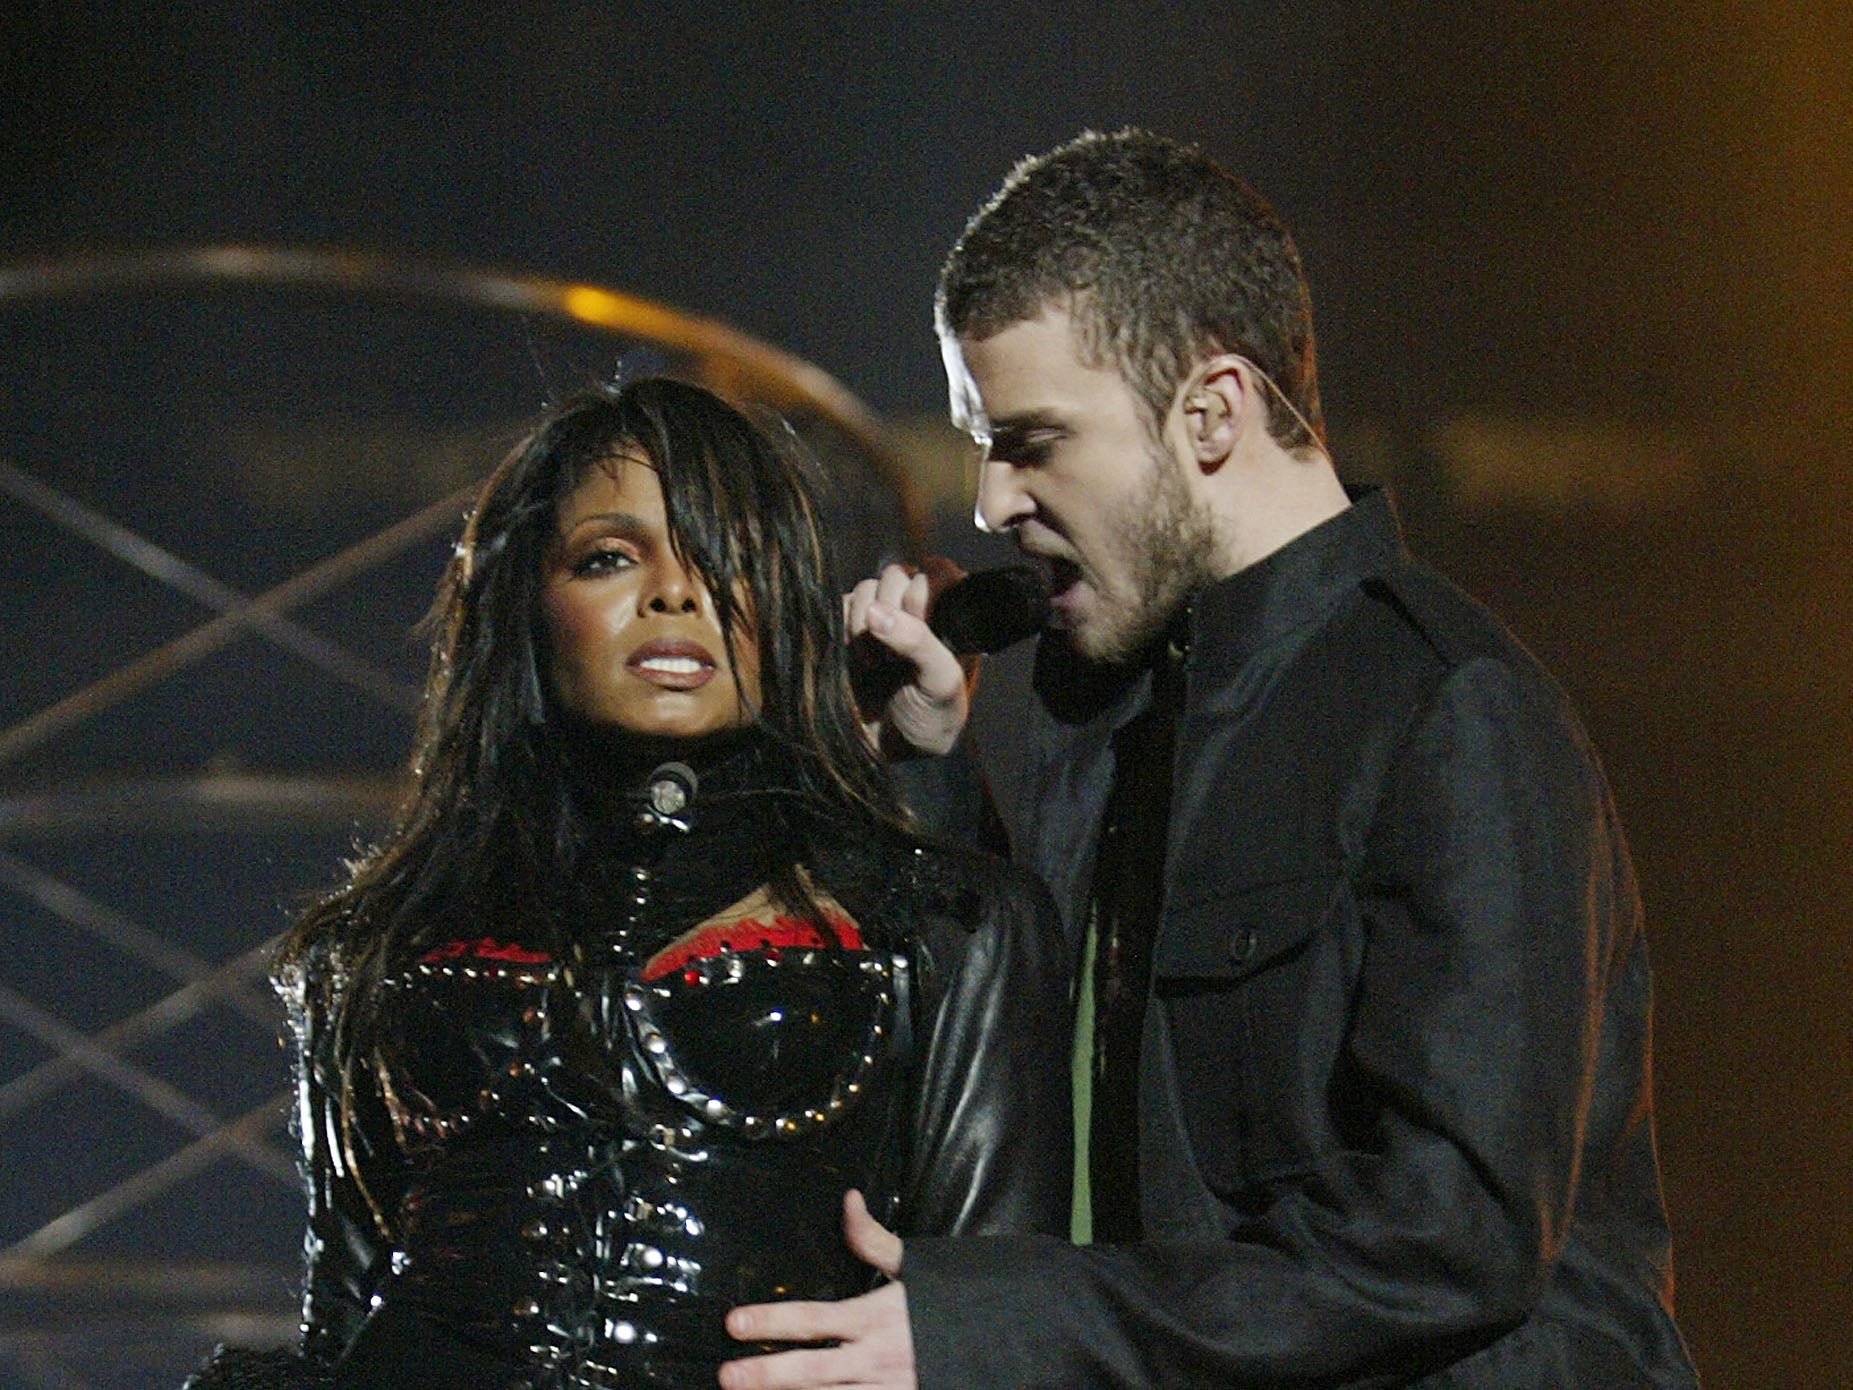 Janet is "open" to performing with Justin again, 14 years after their famous 'nipplegate' malfunction shocked America.